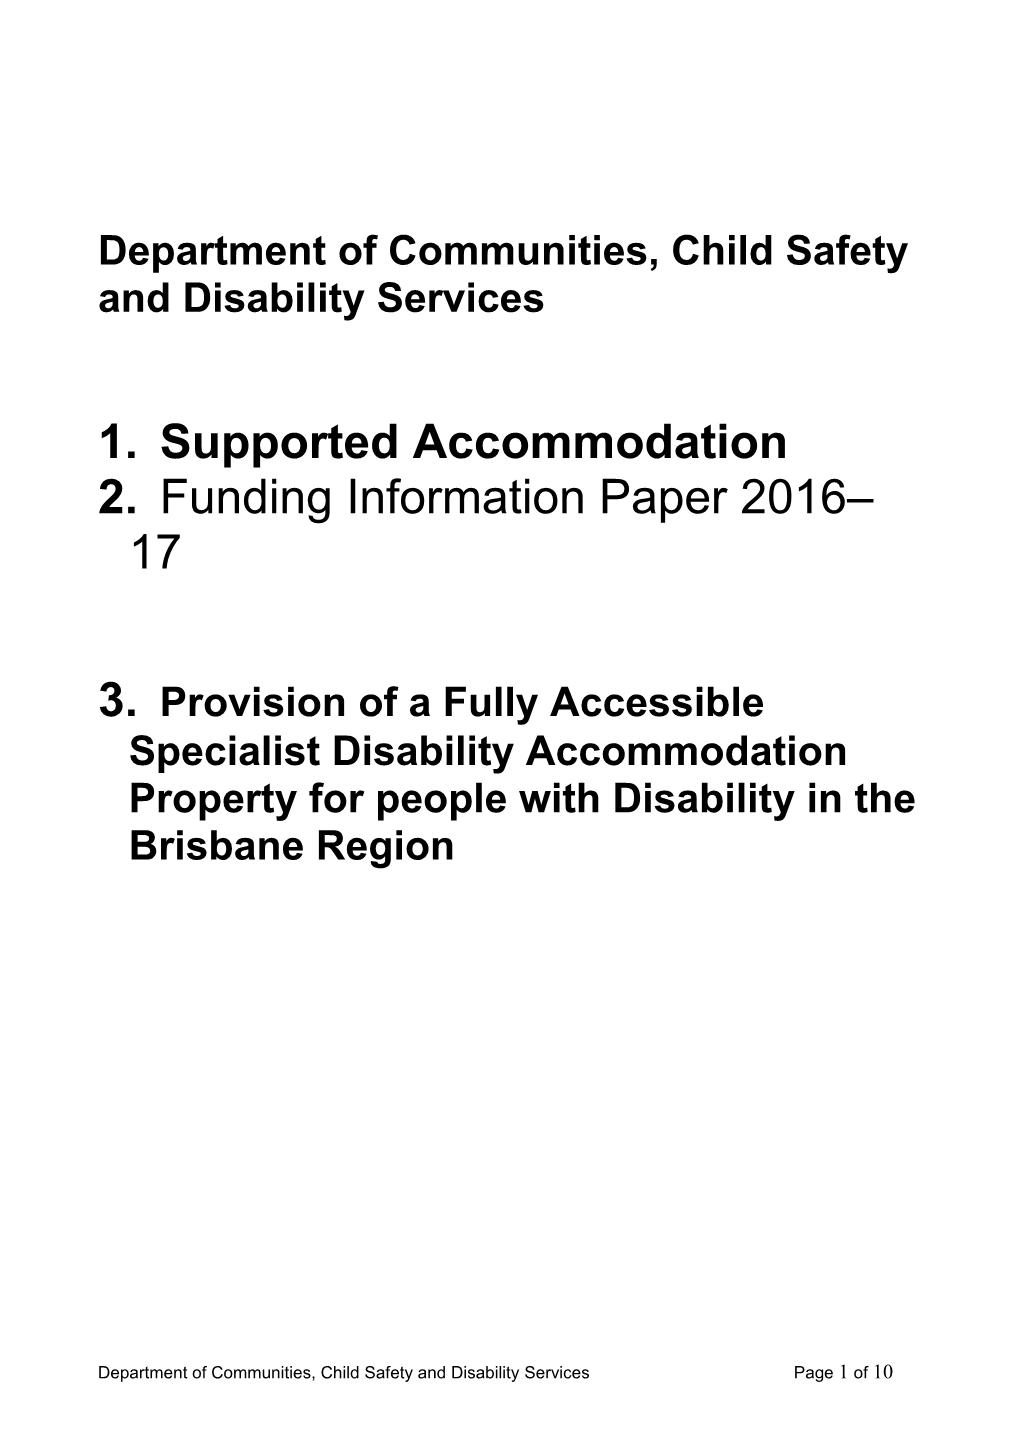 Supported Accommodation Funding Information Paper 2016-17